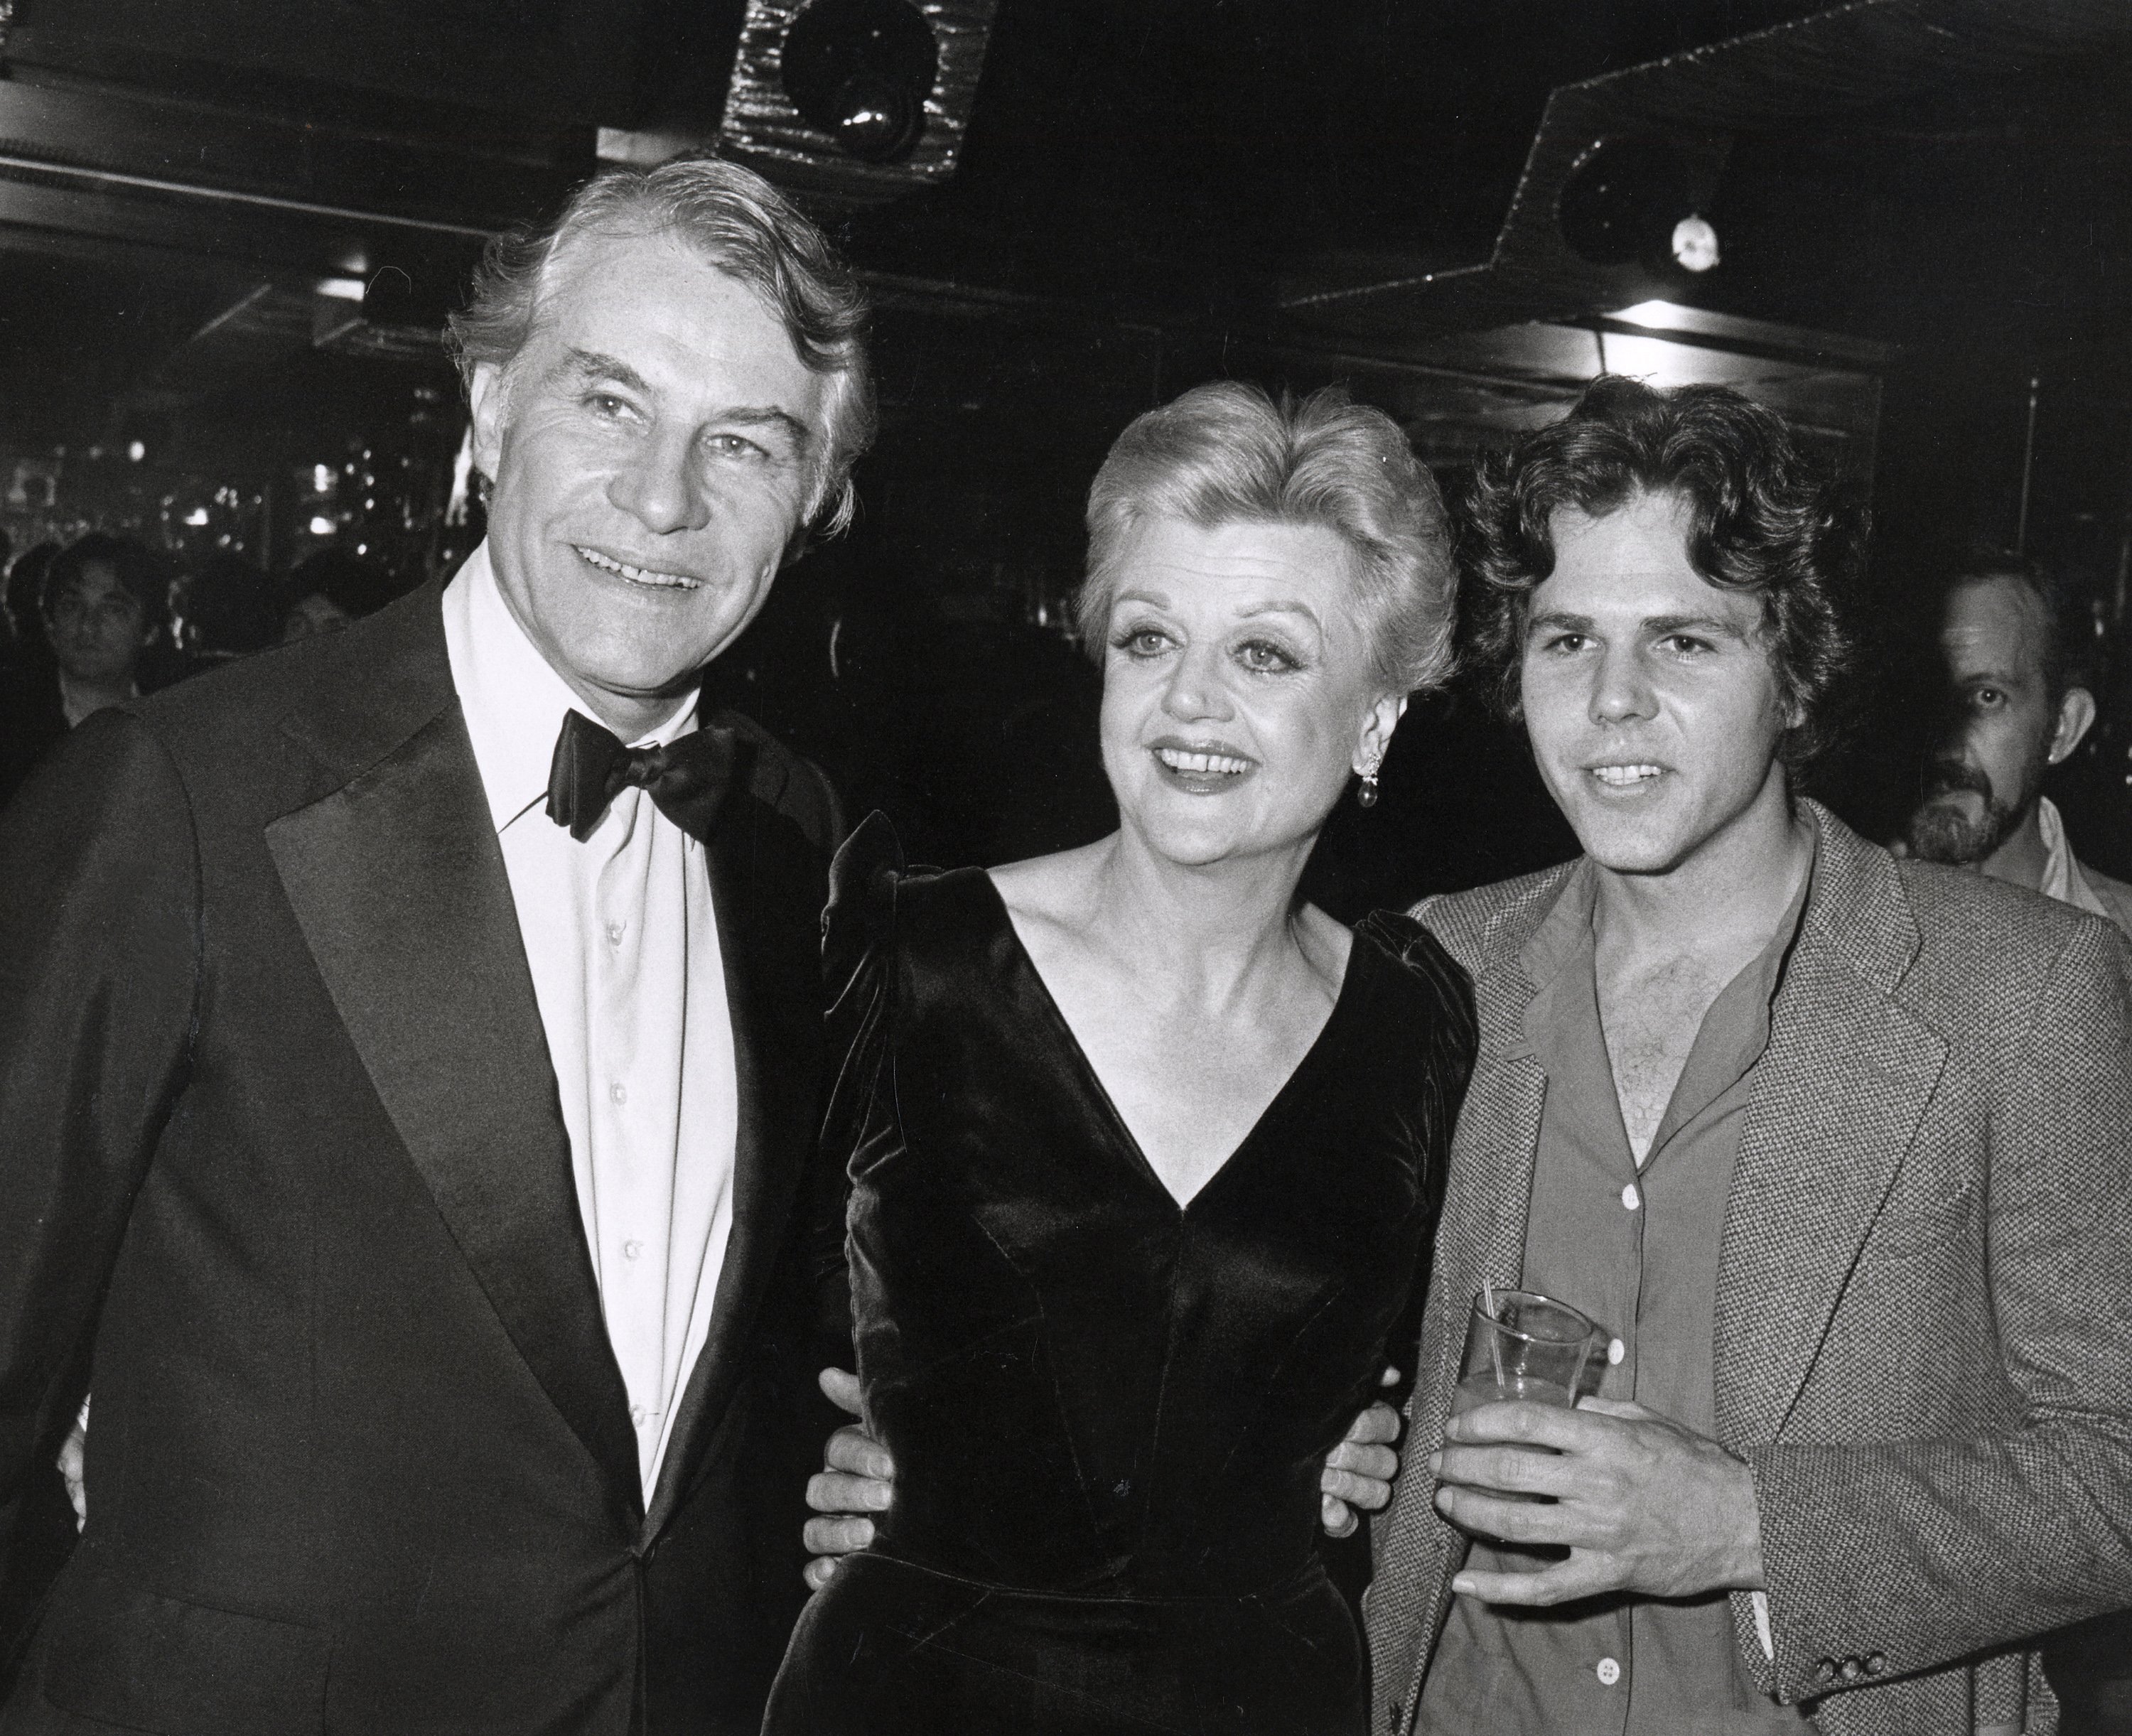 Peter Shaw, Angela Lansbury, and Anthony Shaw during the Ruby Awards on December 16, 1979, in New York City | Source: Getty Images